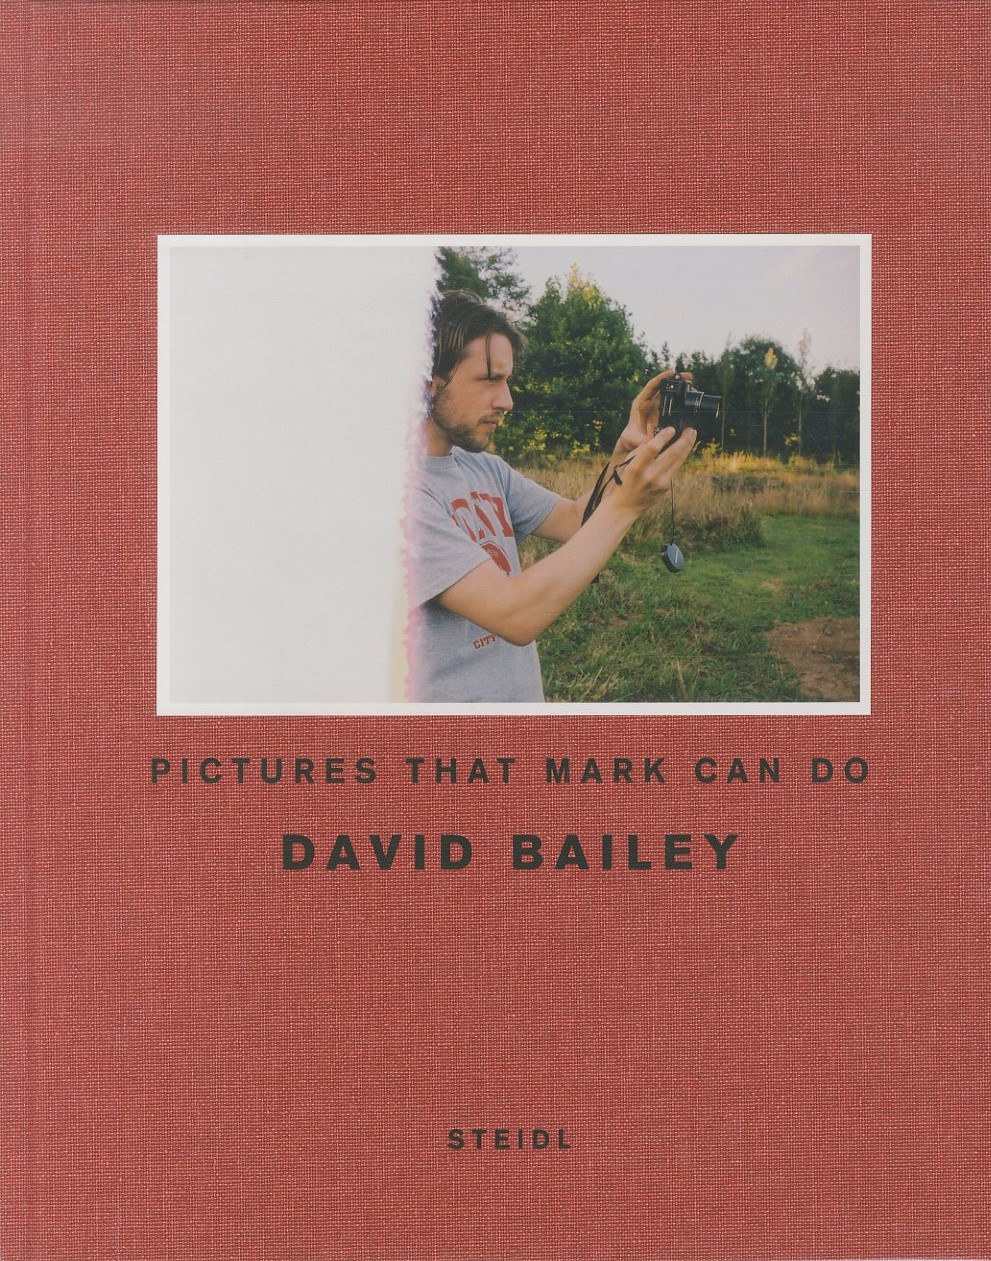 「Pictures that Mark Can Do / David Bailey」メイン画像